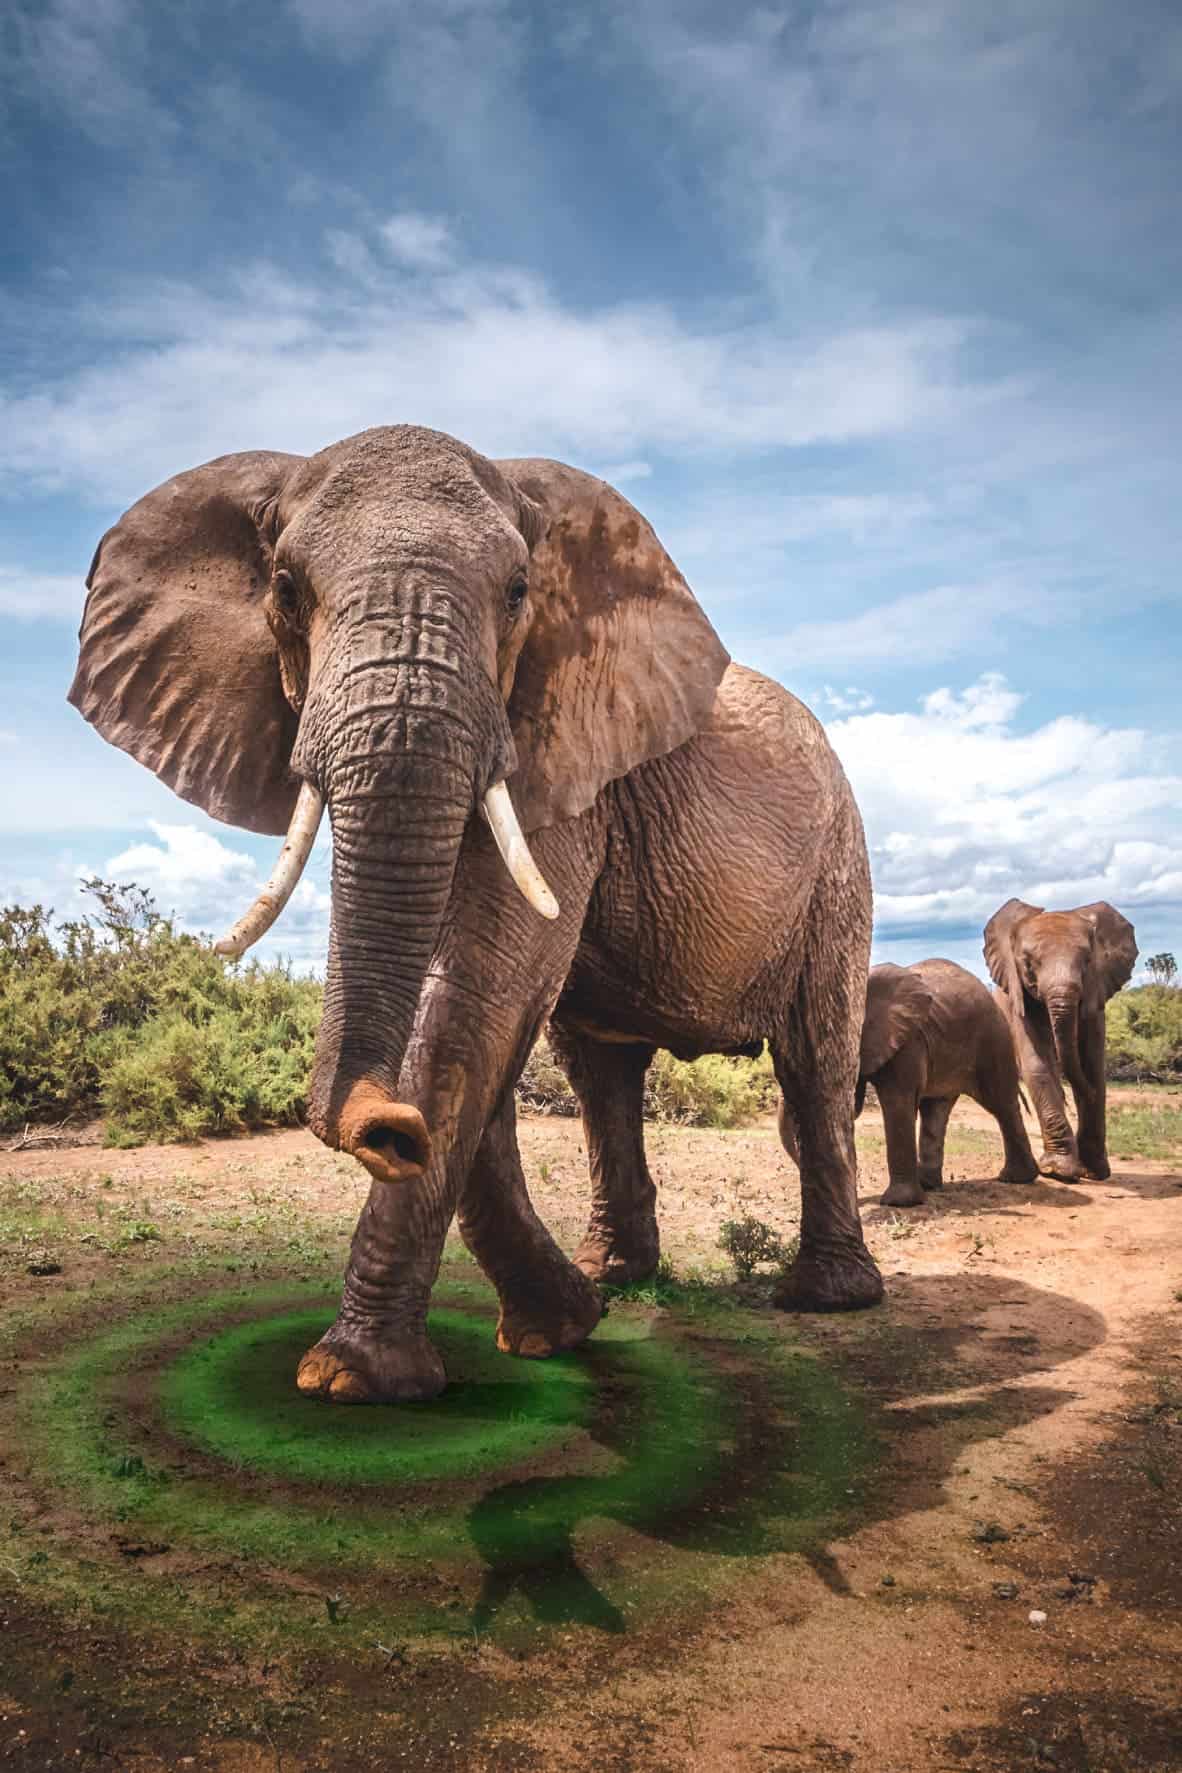 This image shows an African elephant with a visualization of the vibrations it generates, which can be used to determine its behavior. Image credits: Robbie Labanowski.